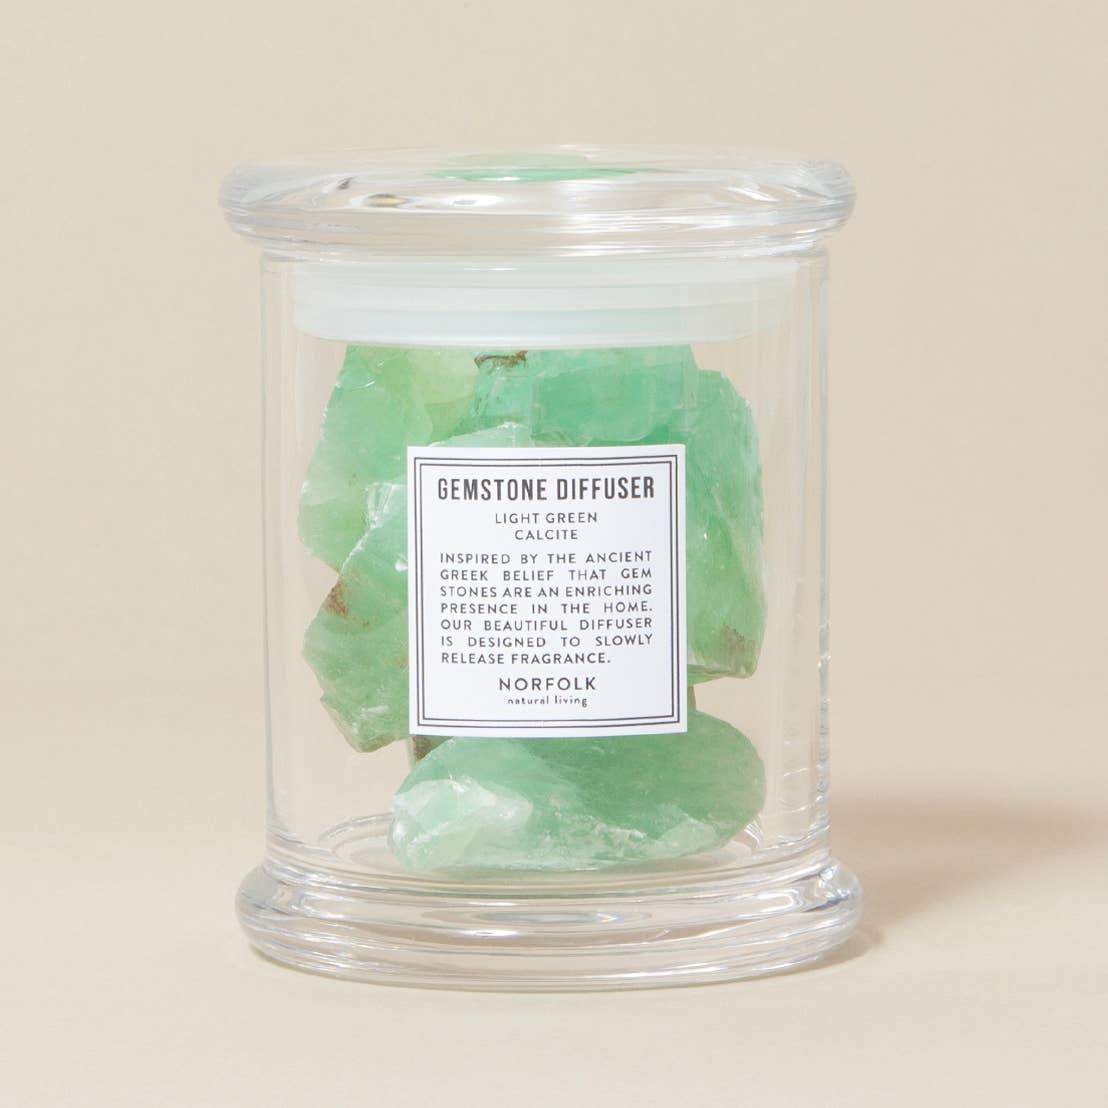 A clear jar filled with Norfolk Natural Living Coastal Gemstone Diffuser - Light Green Calcite gemstones, labeled "gemstone diffuser - calcite" detailing its use to infuse spaces with delicate, naturally releasing fragrance.